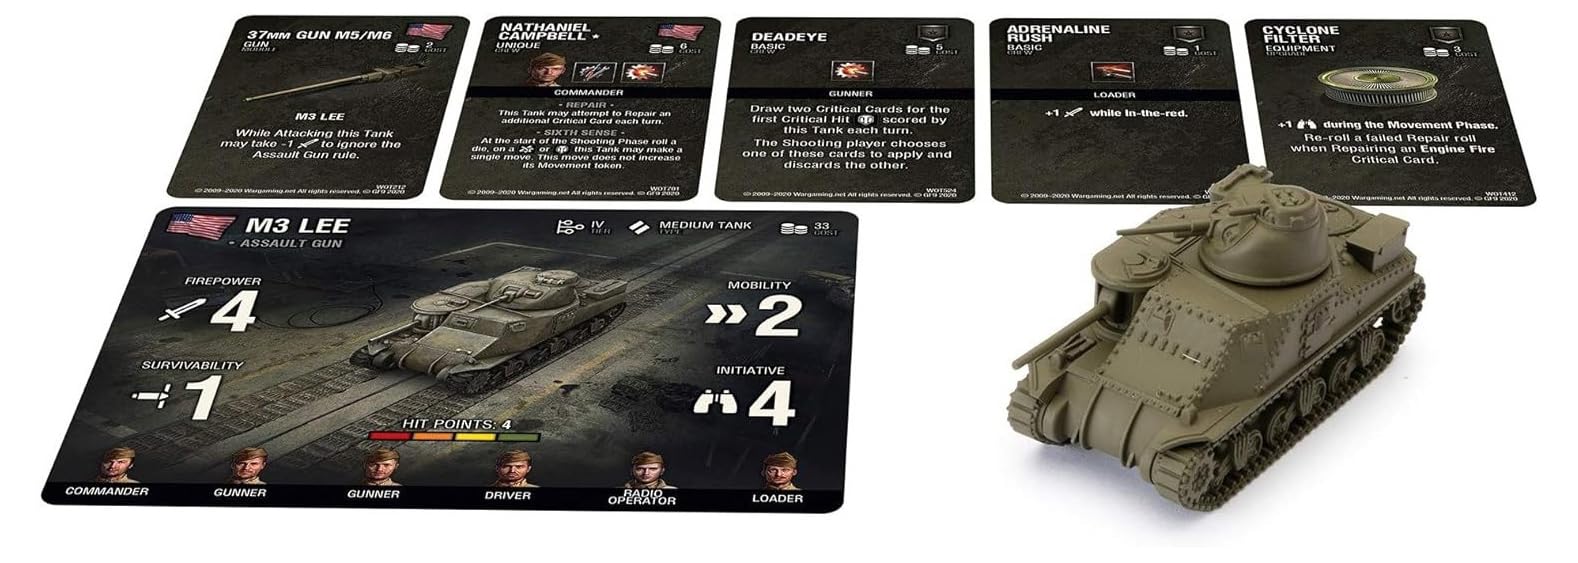 Gale Force Nine Miniatures Games Gale Force Nine World of Tanks: Miniatures Game - American M3 Lee